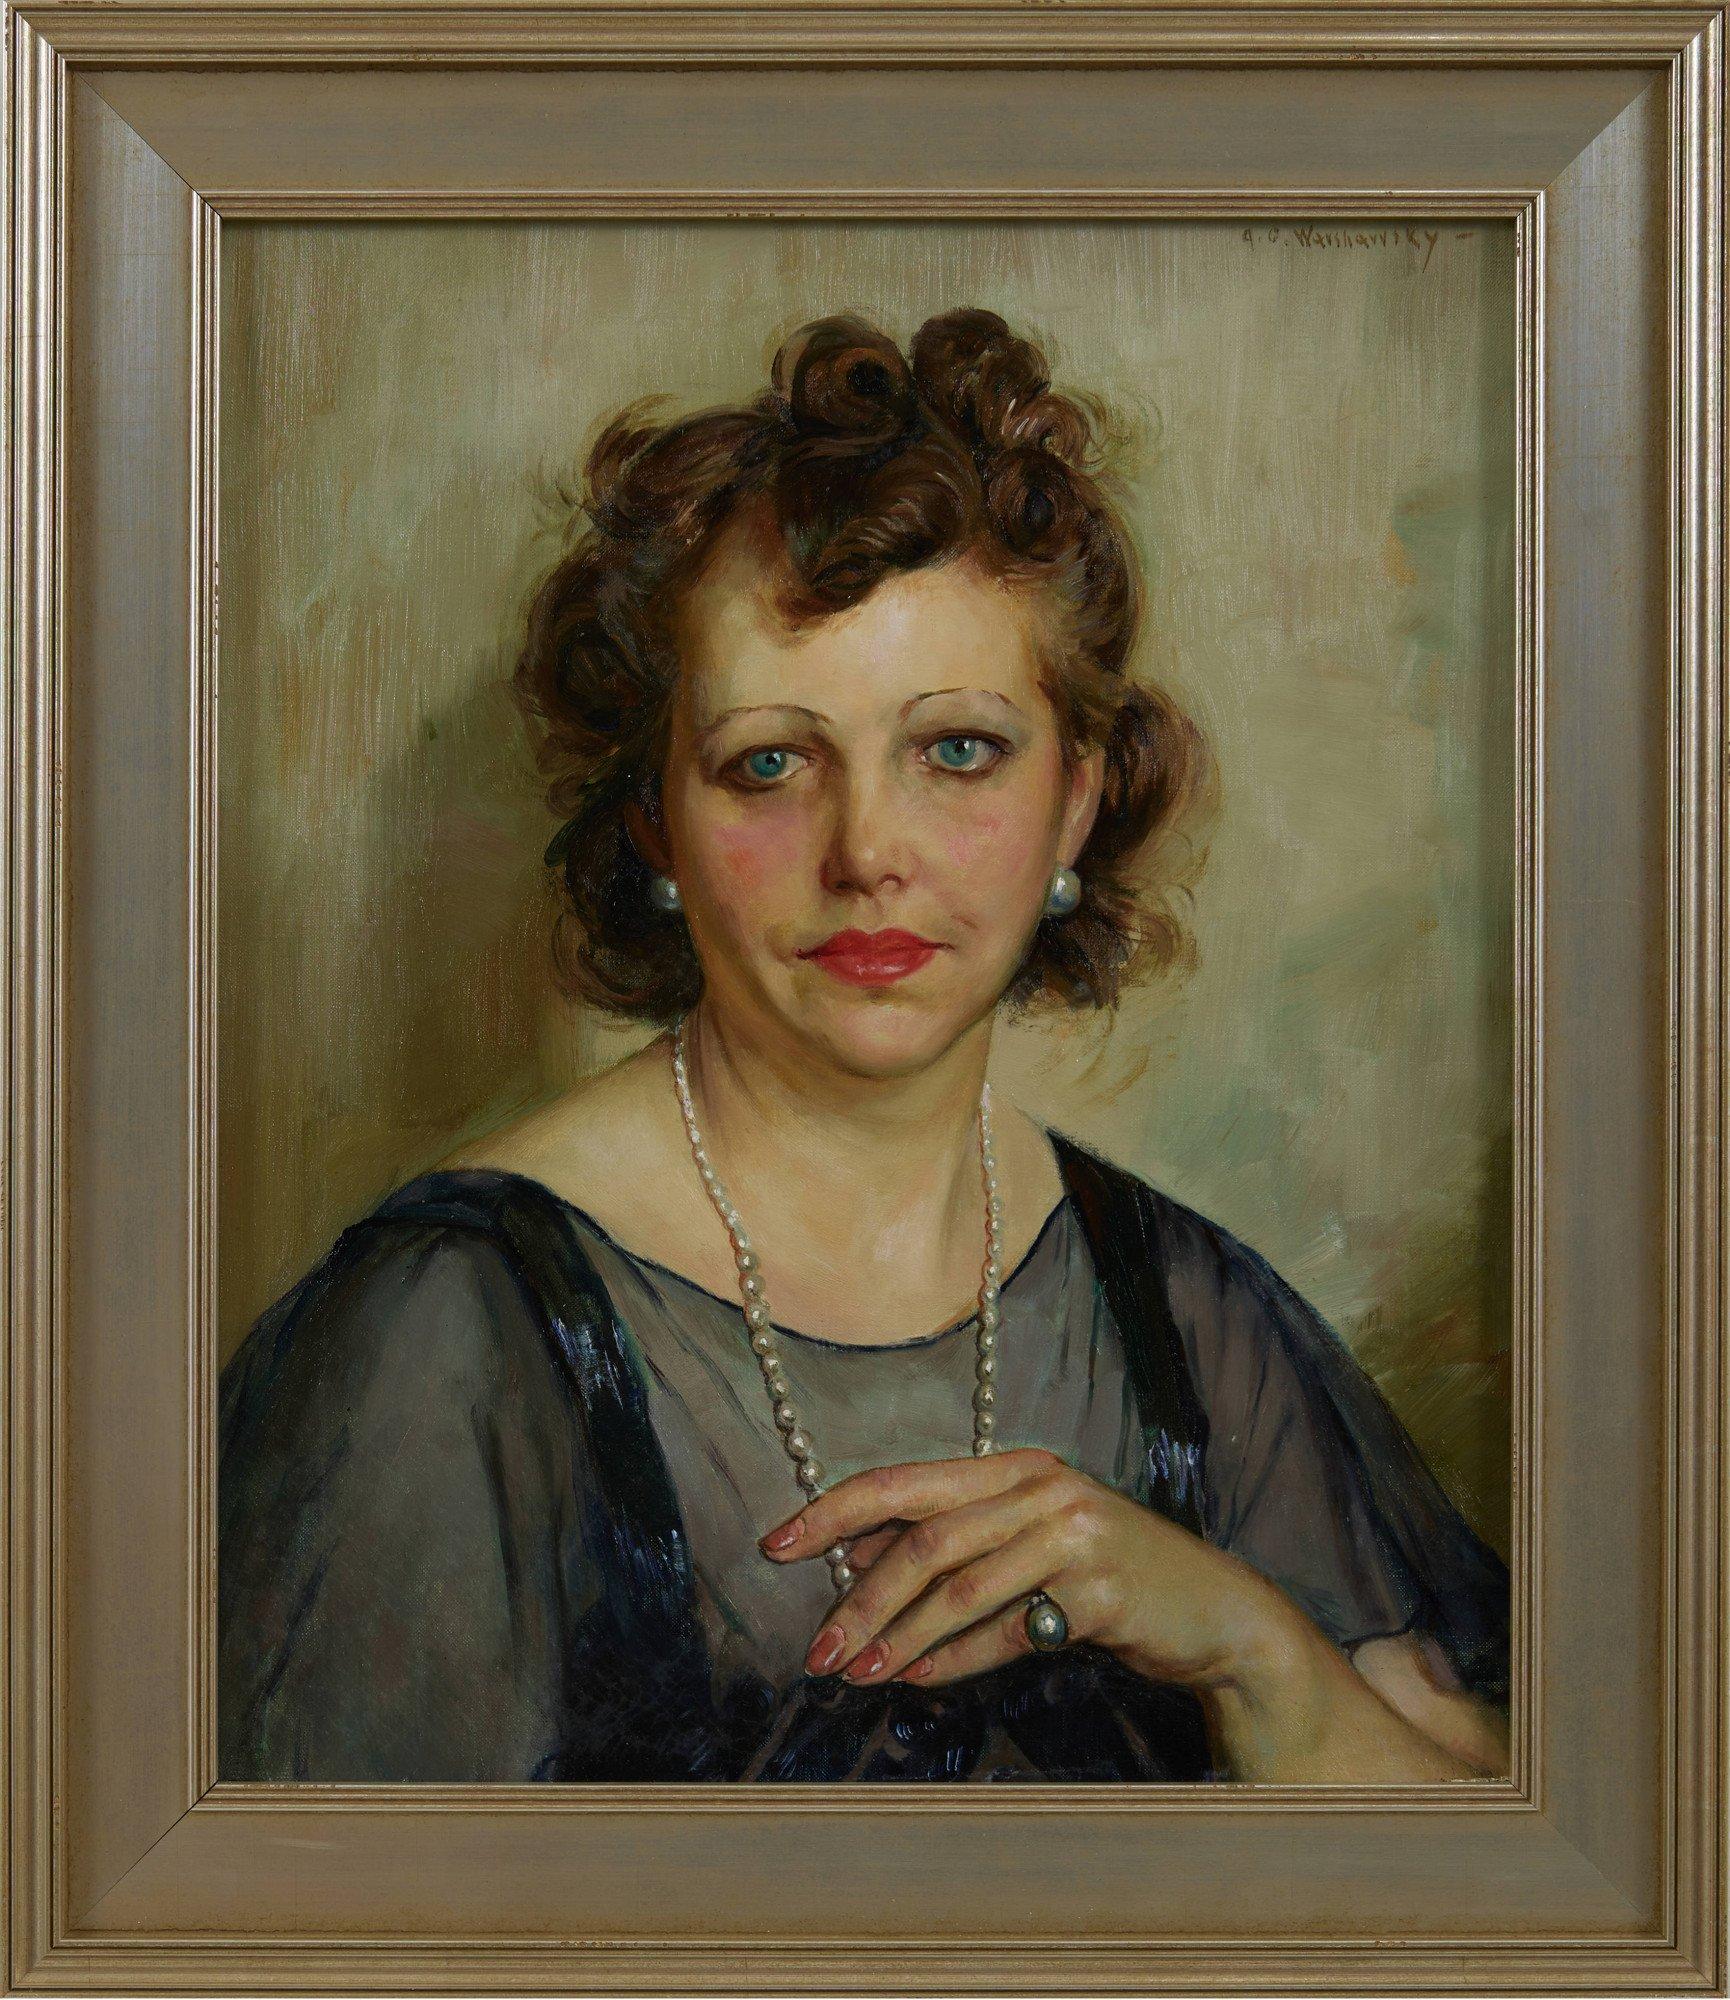 The Antique Dealer, 20th Century Oil Portrait of a Woman, Cleveland School - Painting by Abel Warshawsky